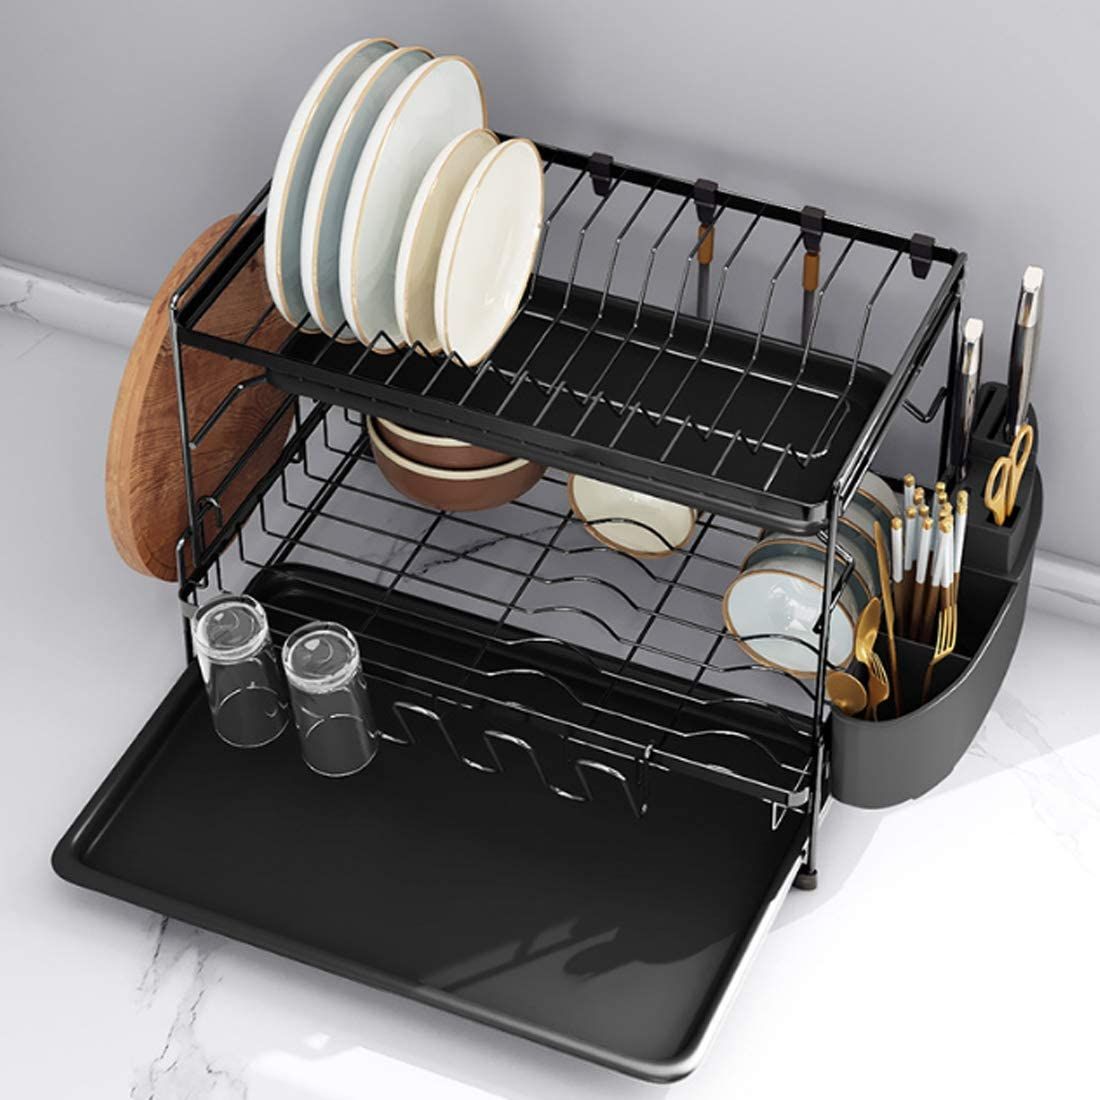 Up To 69% Off on NewHome 2-Tier Dish Drying Ra